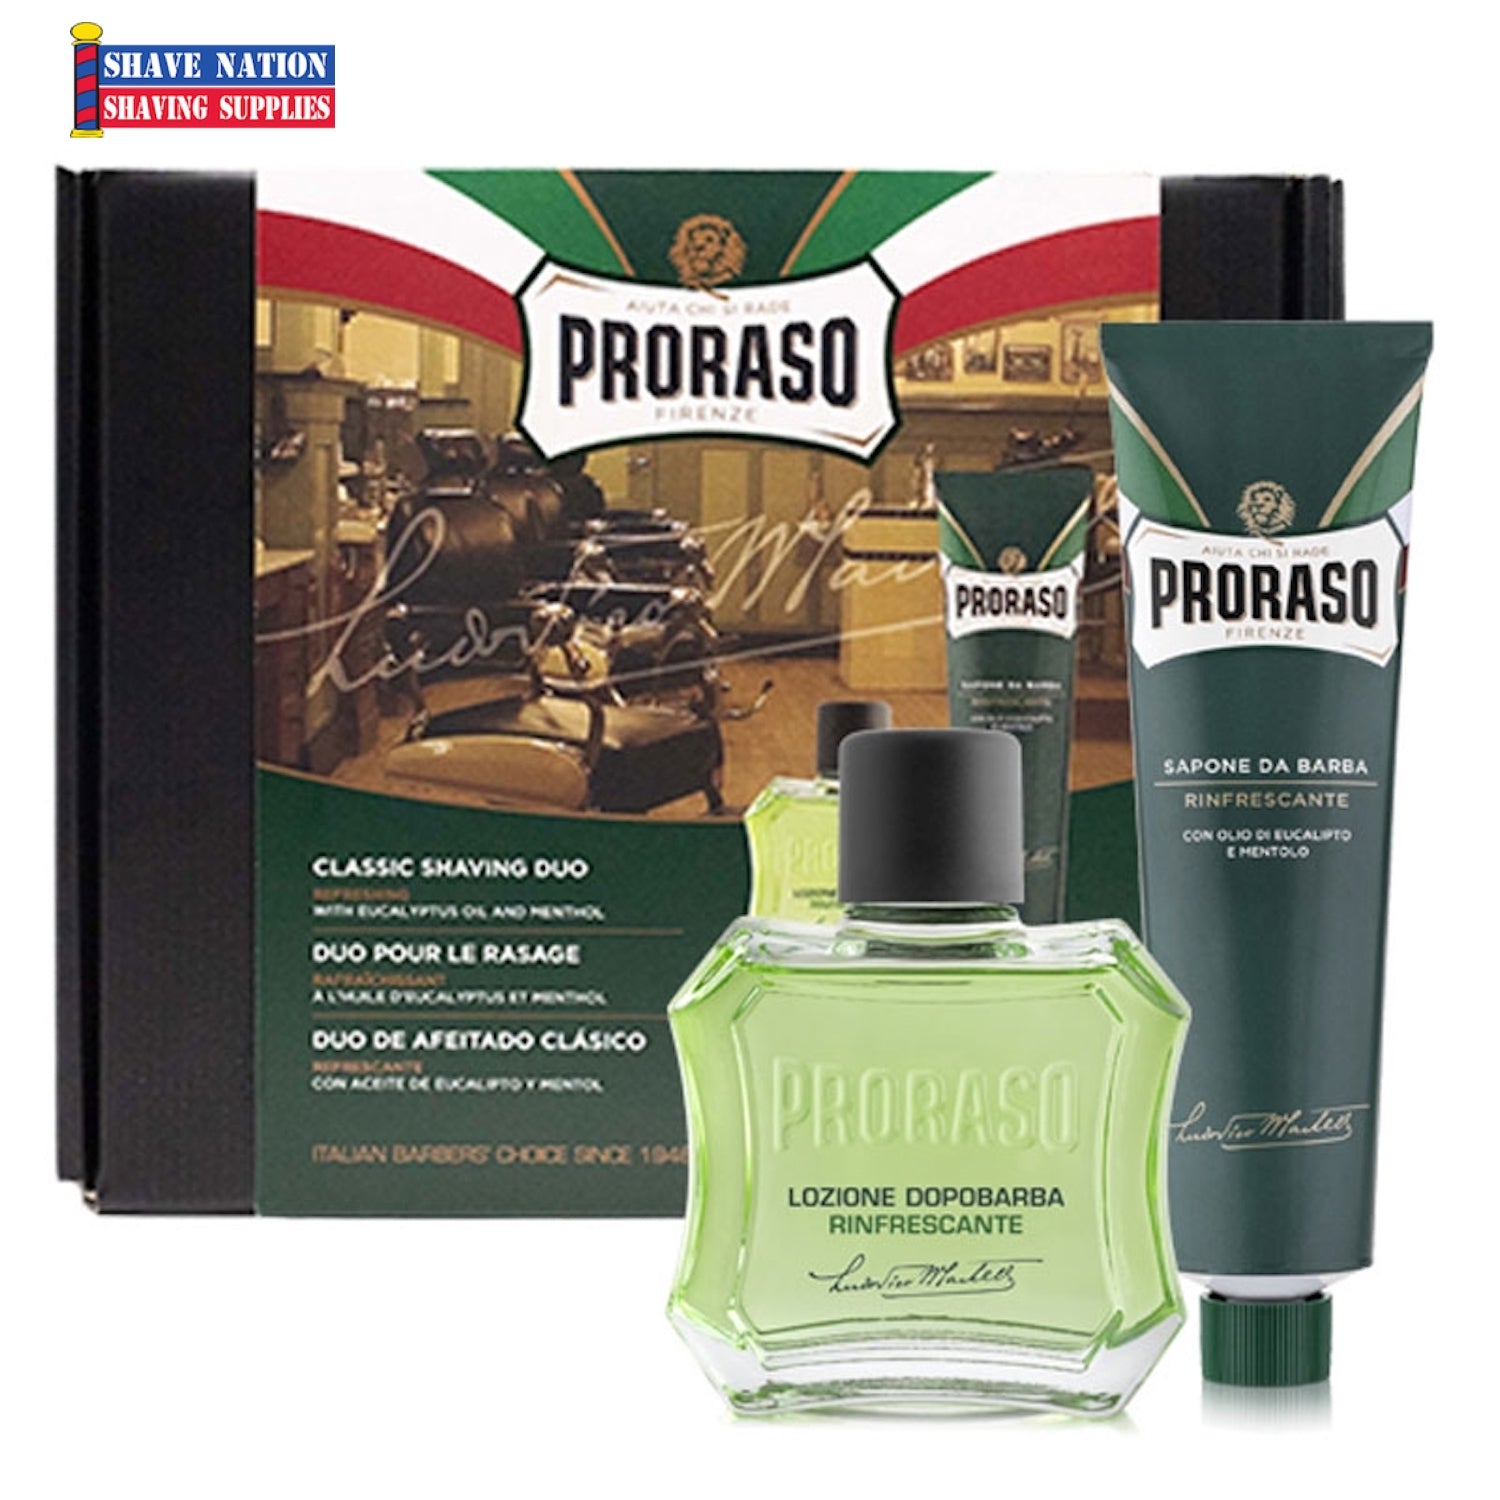 Proraso Classic Shaving Duo for Refreshing - Shave Cream-After Shave Lotion